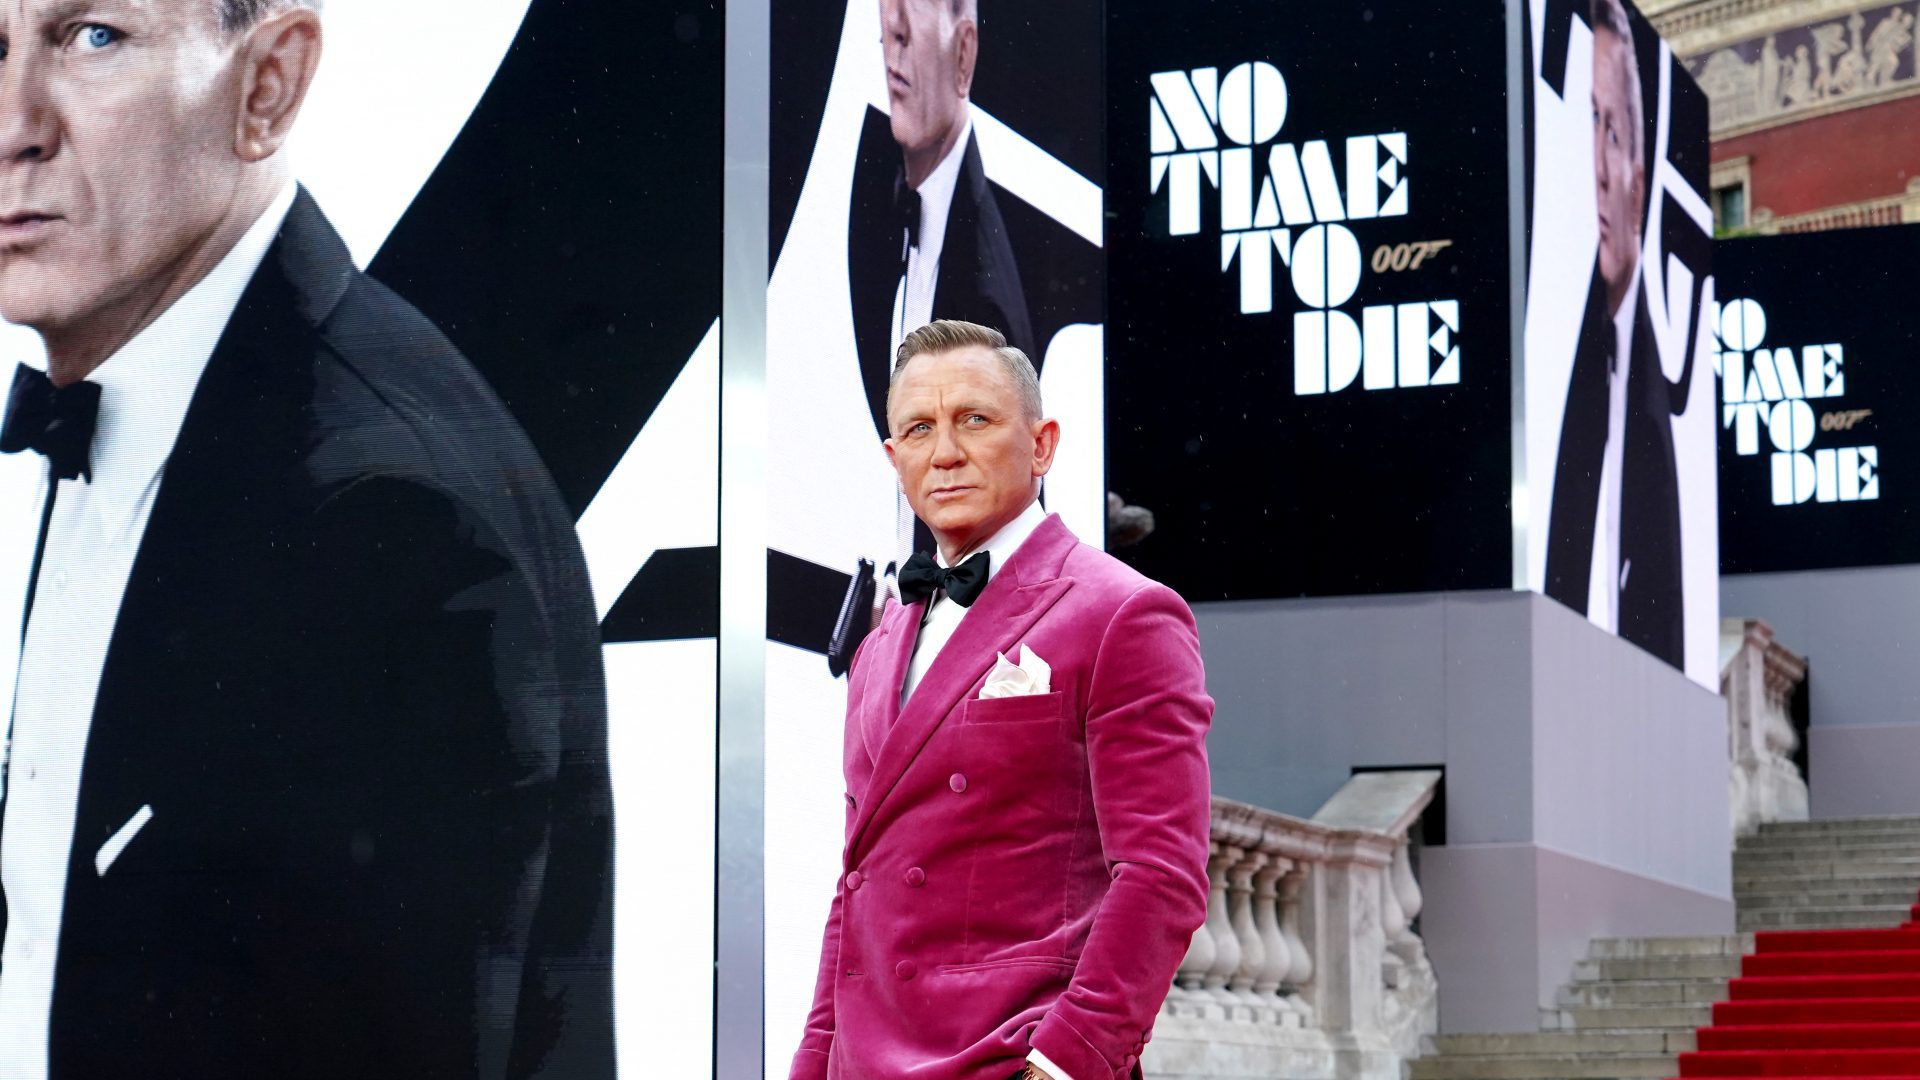 Daniel Craig attending the World Premiere of No Time To Die. Credit: Ian West/PA Wire/PA Images 